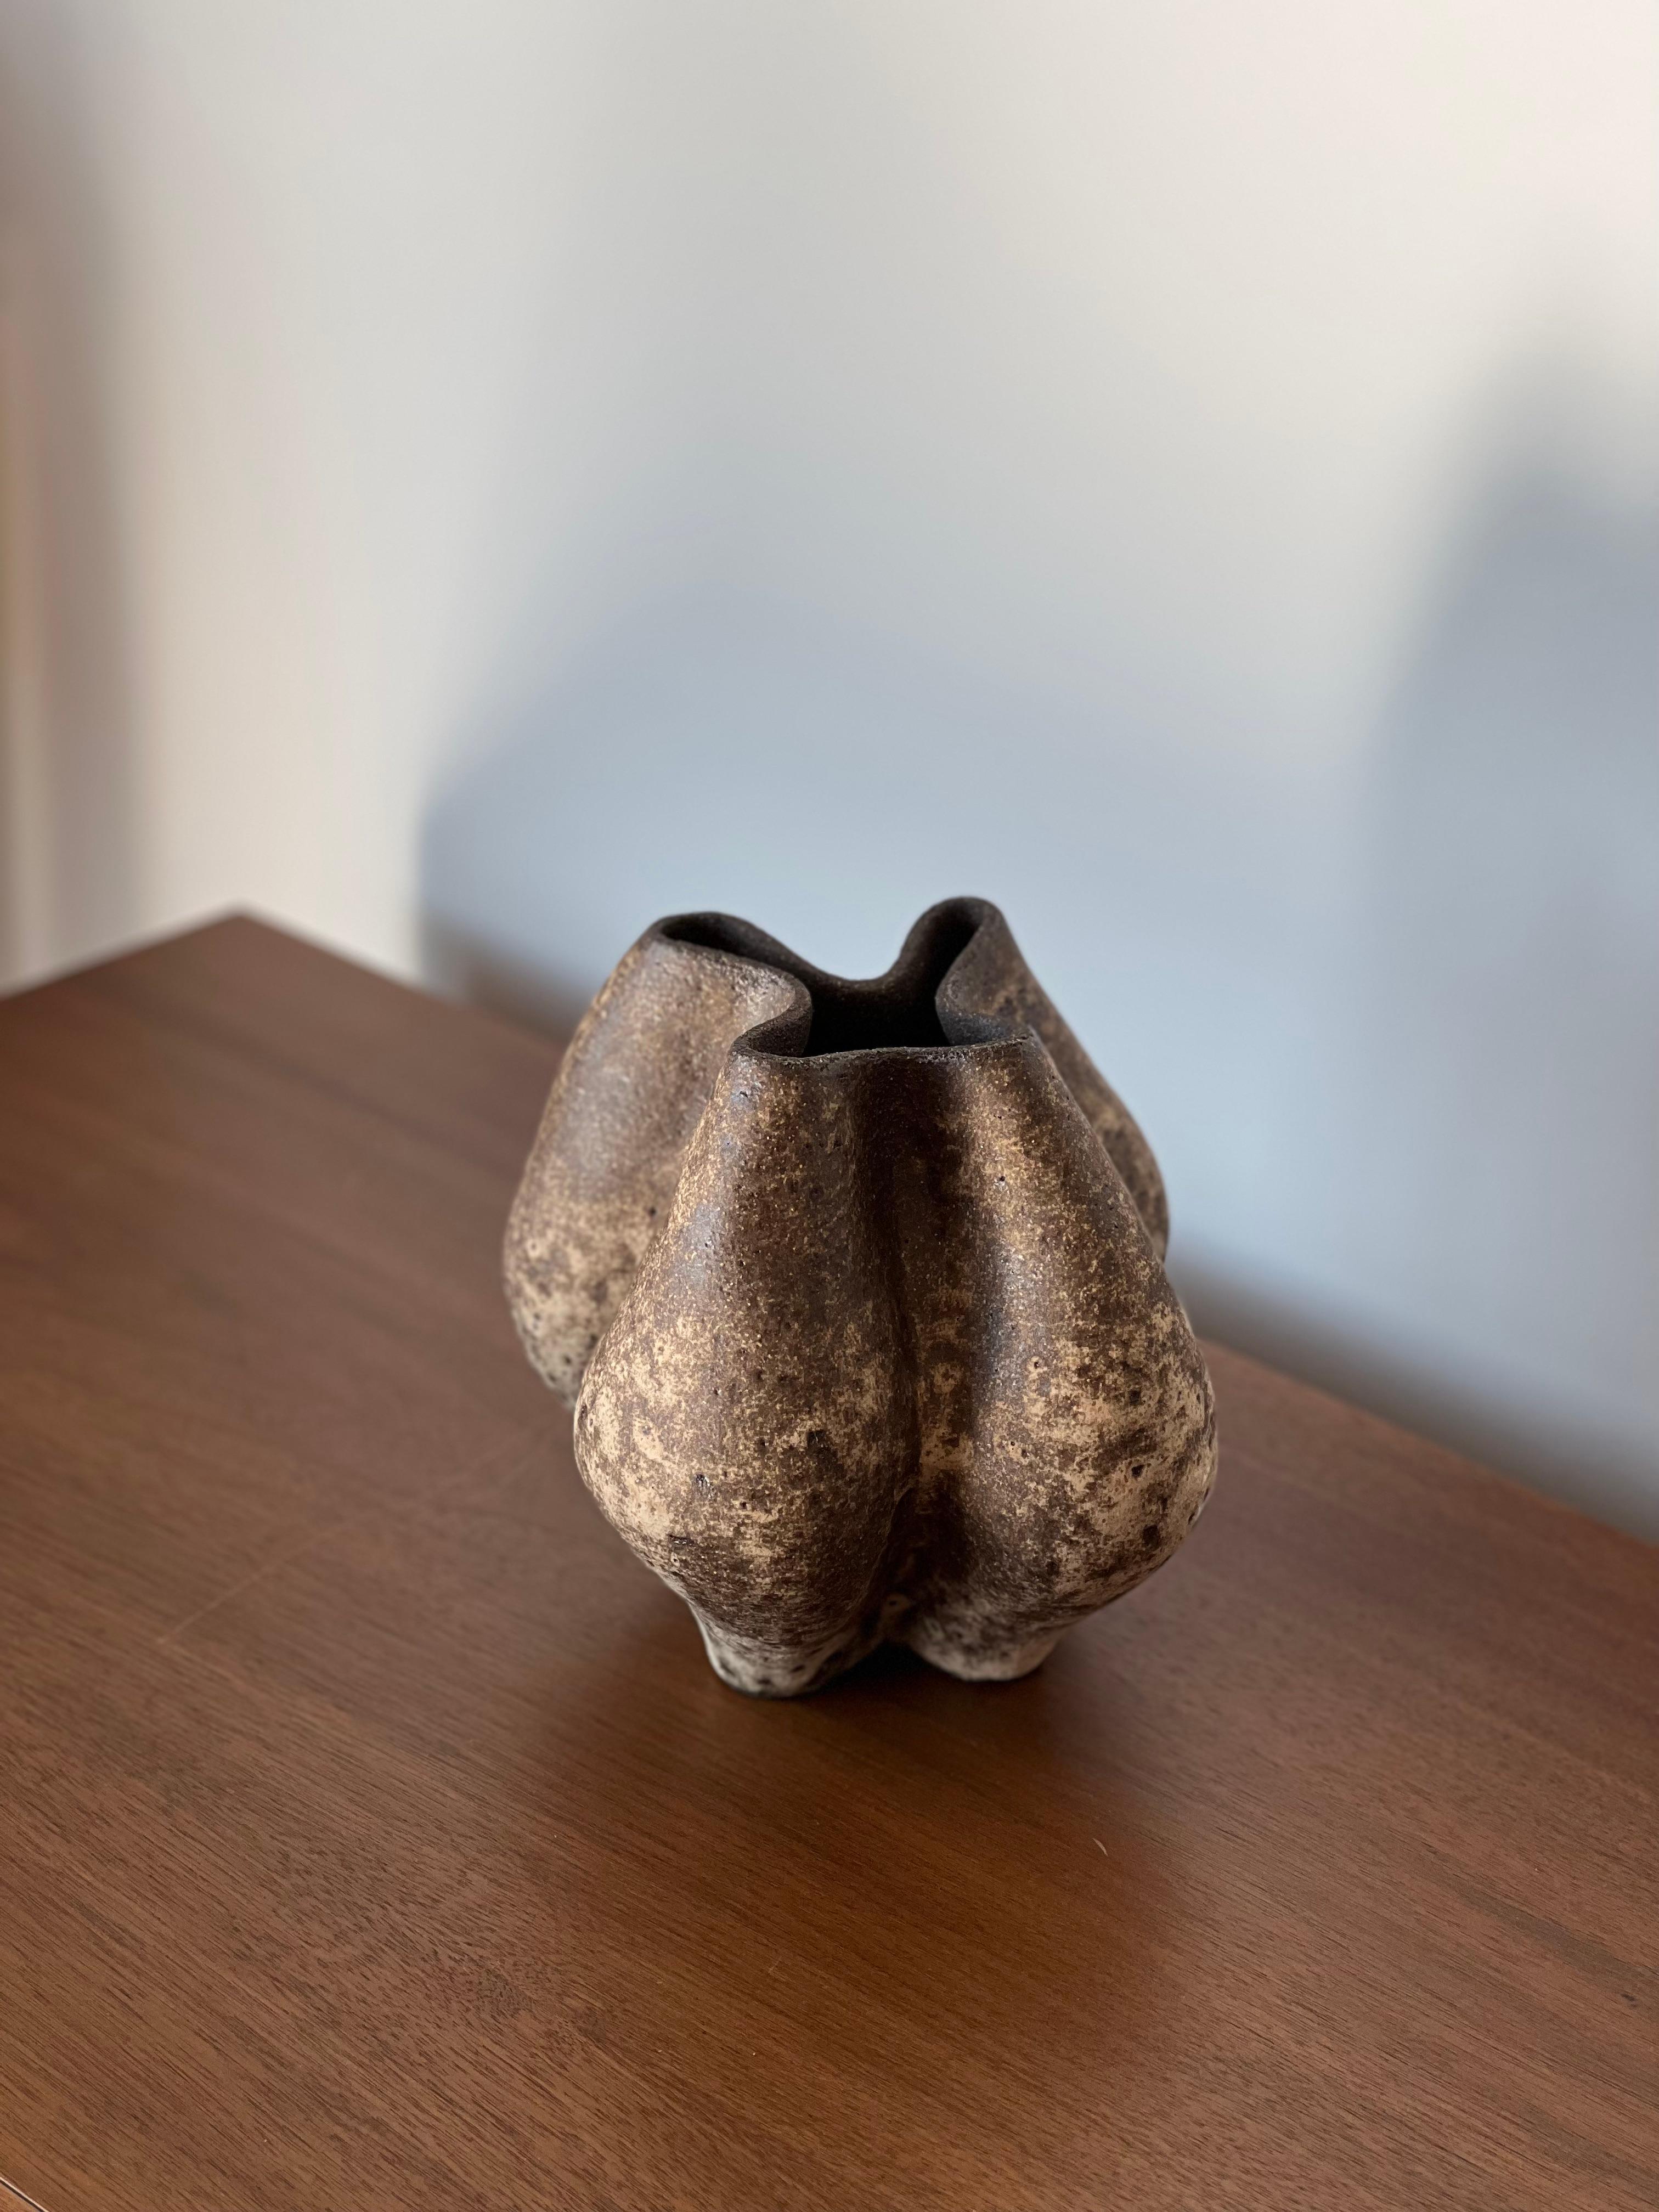 Anatolian 5 Vase by Güler Elçi
Dimensions: W 20.3 x D 20.3 x H 21.5 cm.
Materials: Stoneware Ceramic.

Güler Elçi is a ceramic artist based in Istanbul. In the light of her engineering career, she considers ceramics as a material and likes to push